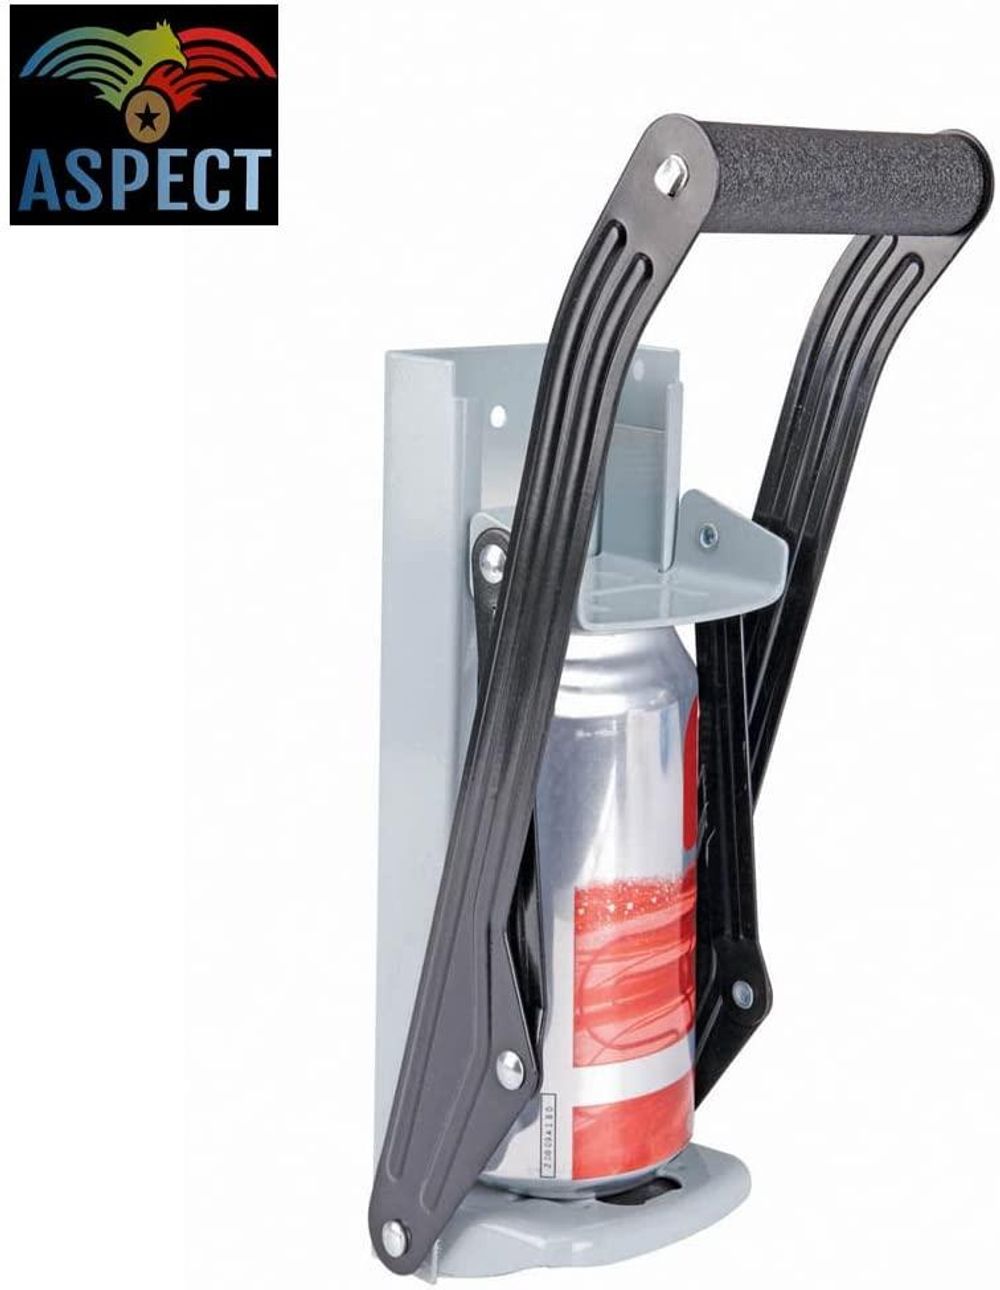 Aspect Heavy Duty Can Crusher, Recycling Wall Mounted Tool